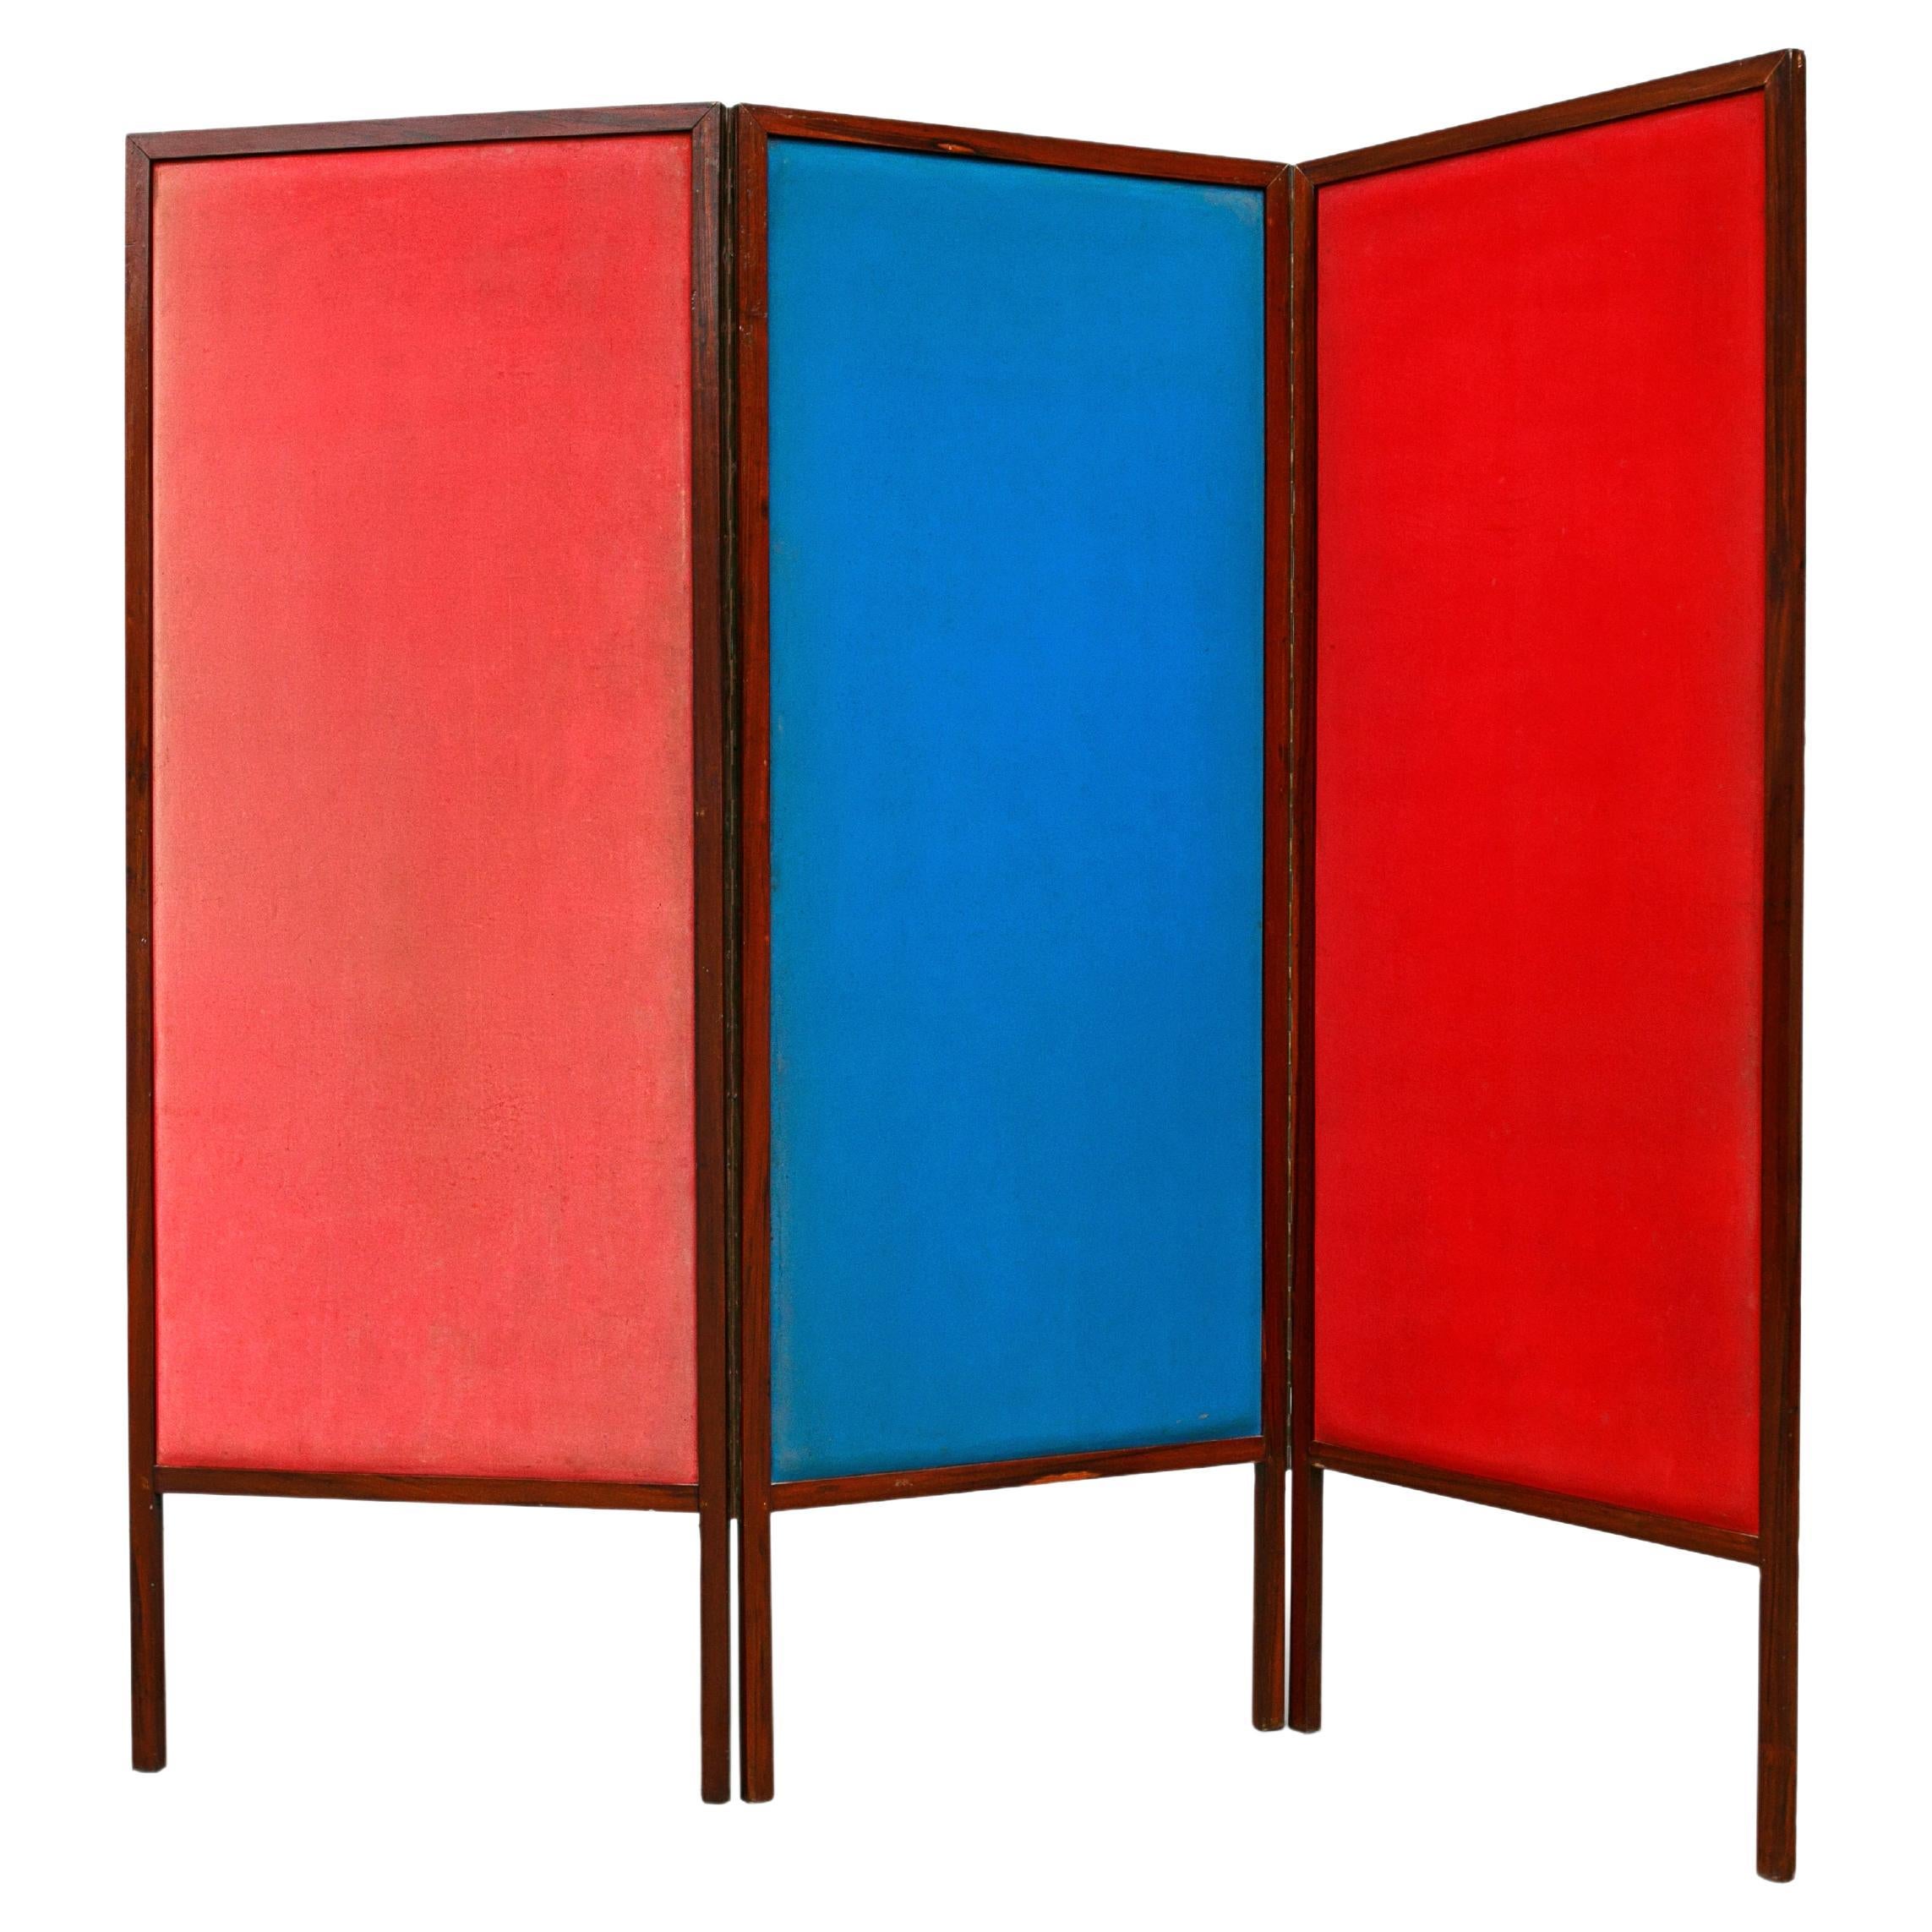 Brazilian Modern Room Divider in Hardwood & Leather by Sergio Rodrigues, 1960s For Sale